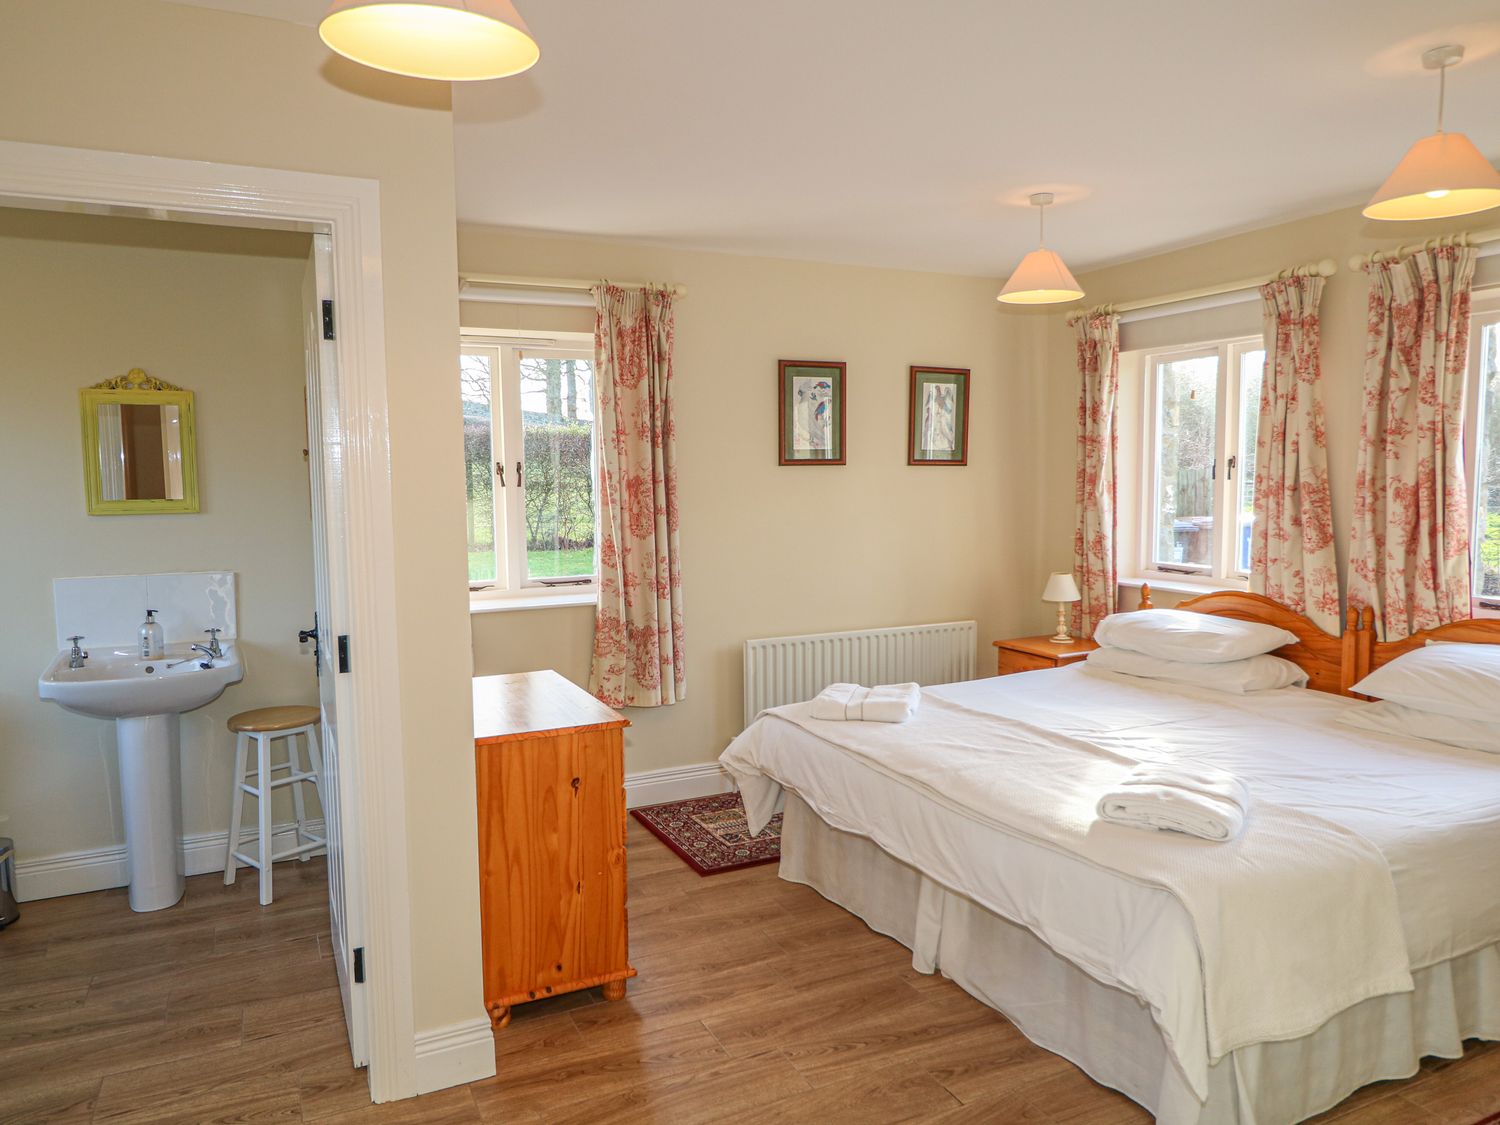 Downstairs kingsize bedroom, with ensuite bathroom, Goose Cottage